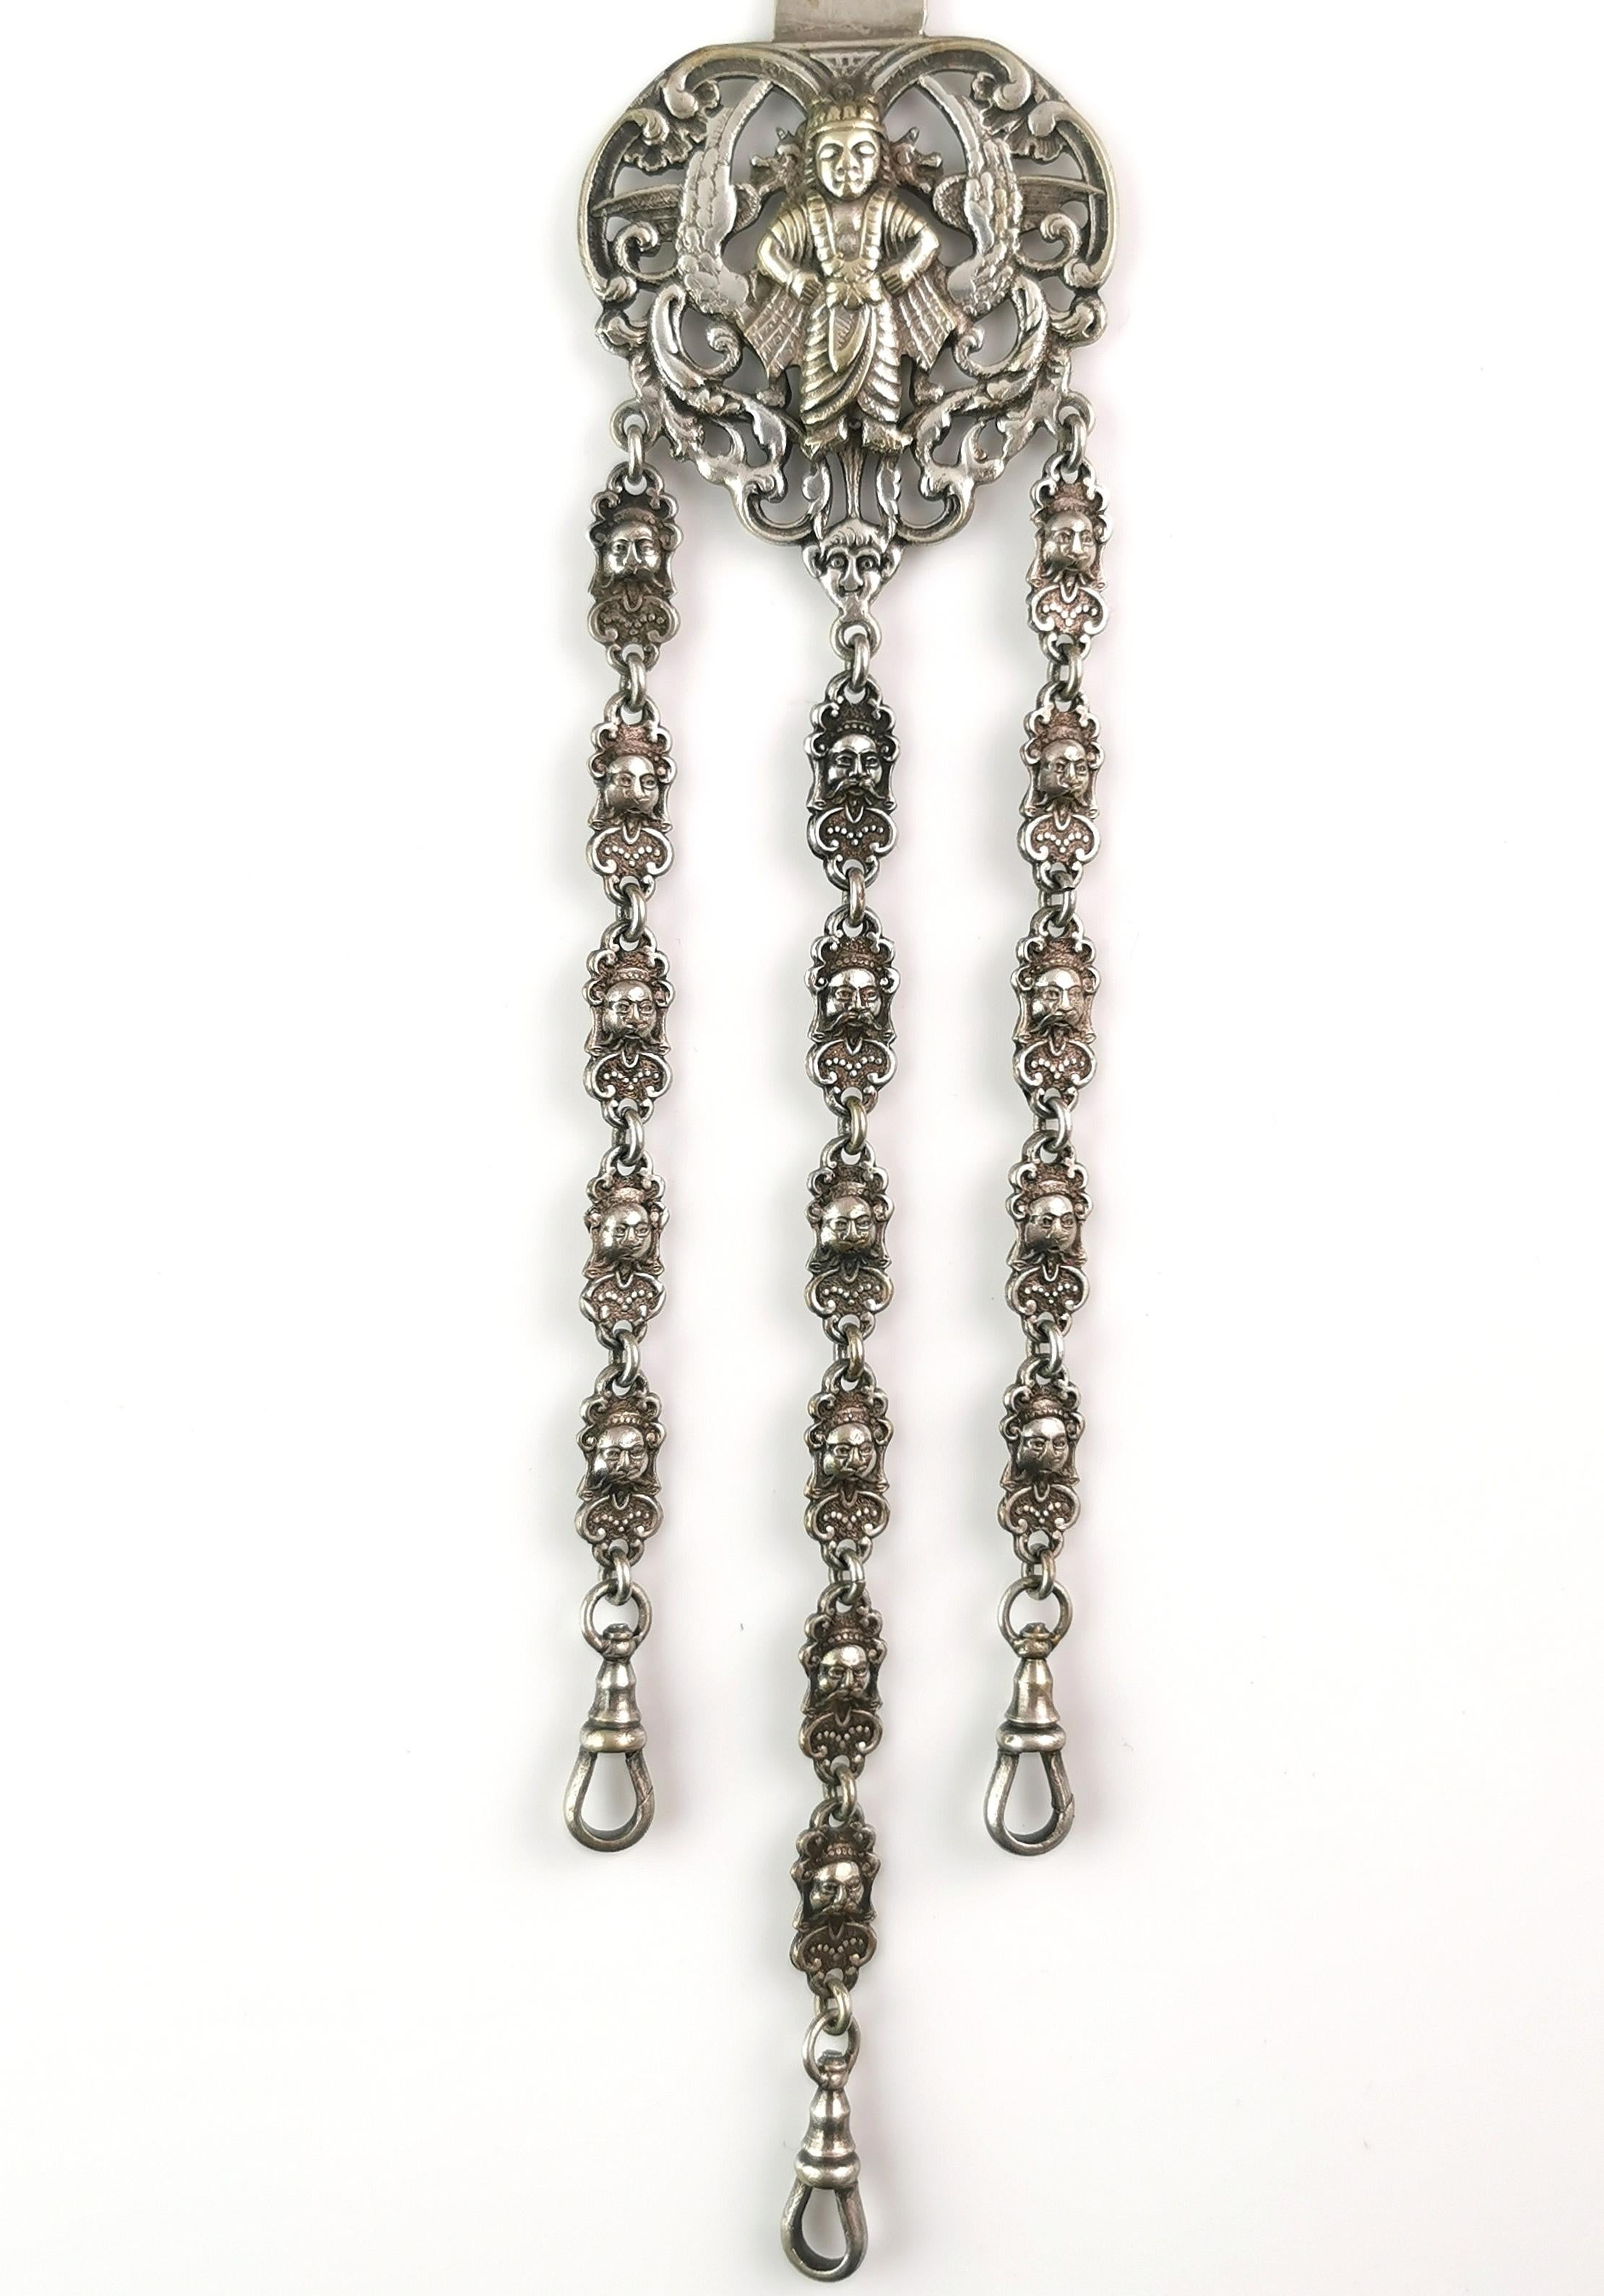 An incredible antique silver plated chatelaine.

A truly beautiful piece, designed to be worn clipped to a belt or sash, the chatelaine has a wonderful design featuring Buddhist Deities and the links are made up of individual mask design lozenges